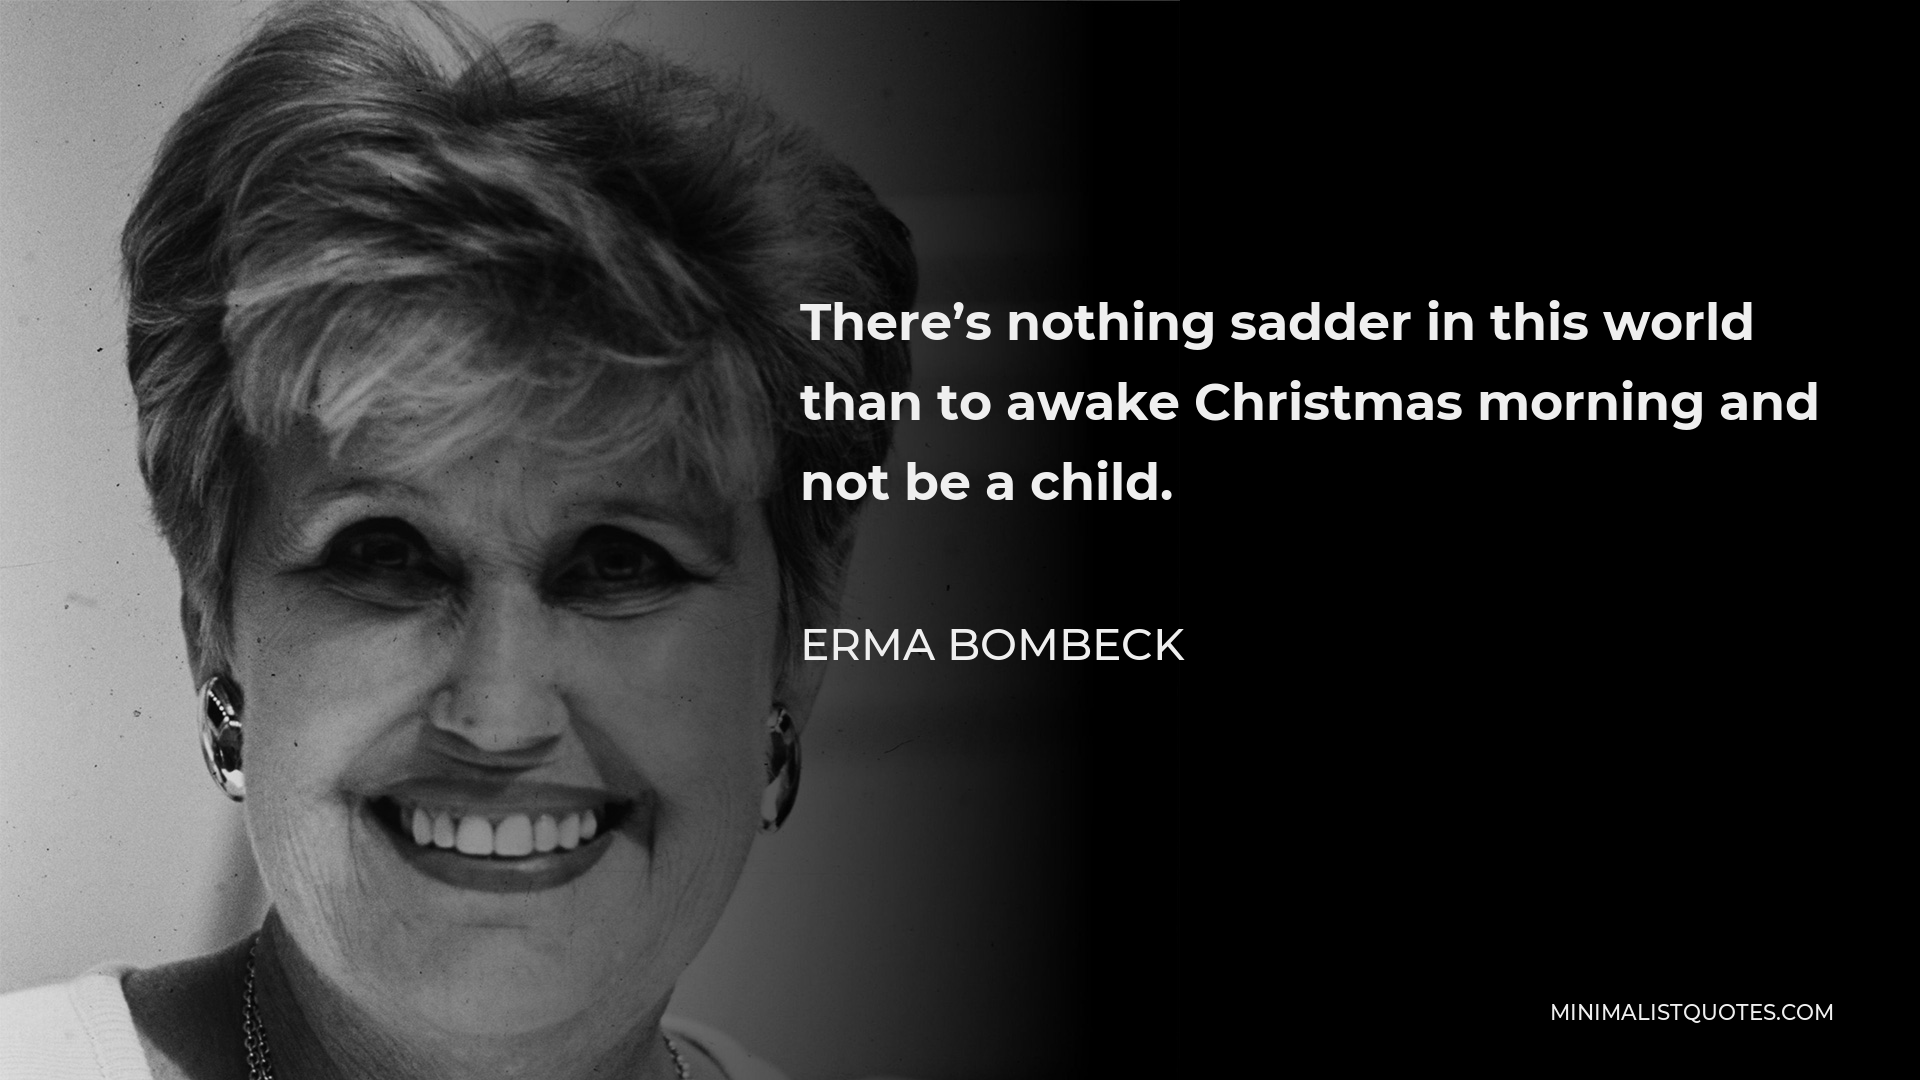 Erma Bombeck Quote - There’s nothing sadder in this world than to awake Christmas morning and not be a child.